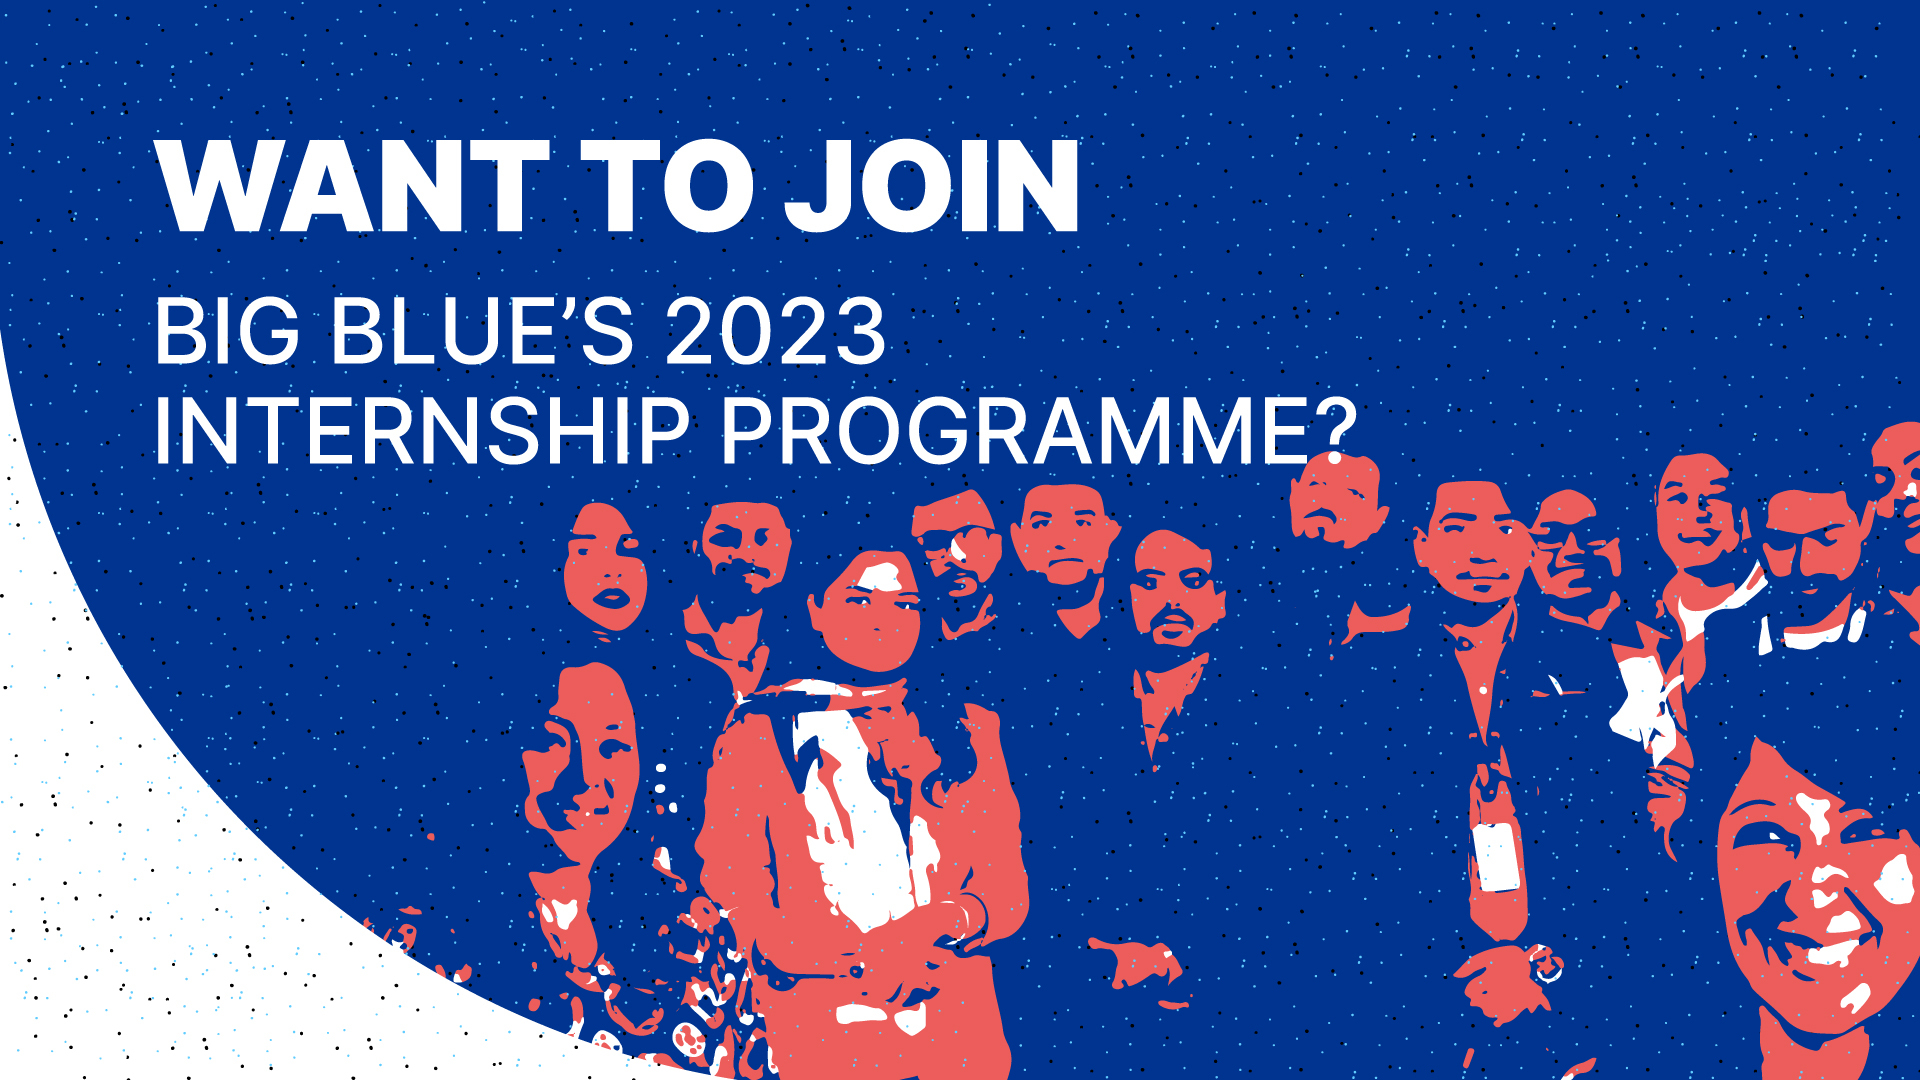 Want to join Big Blue’s 2023 Internship Programme?